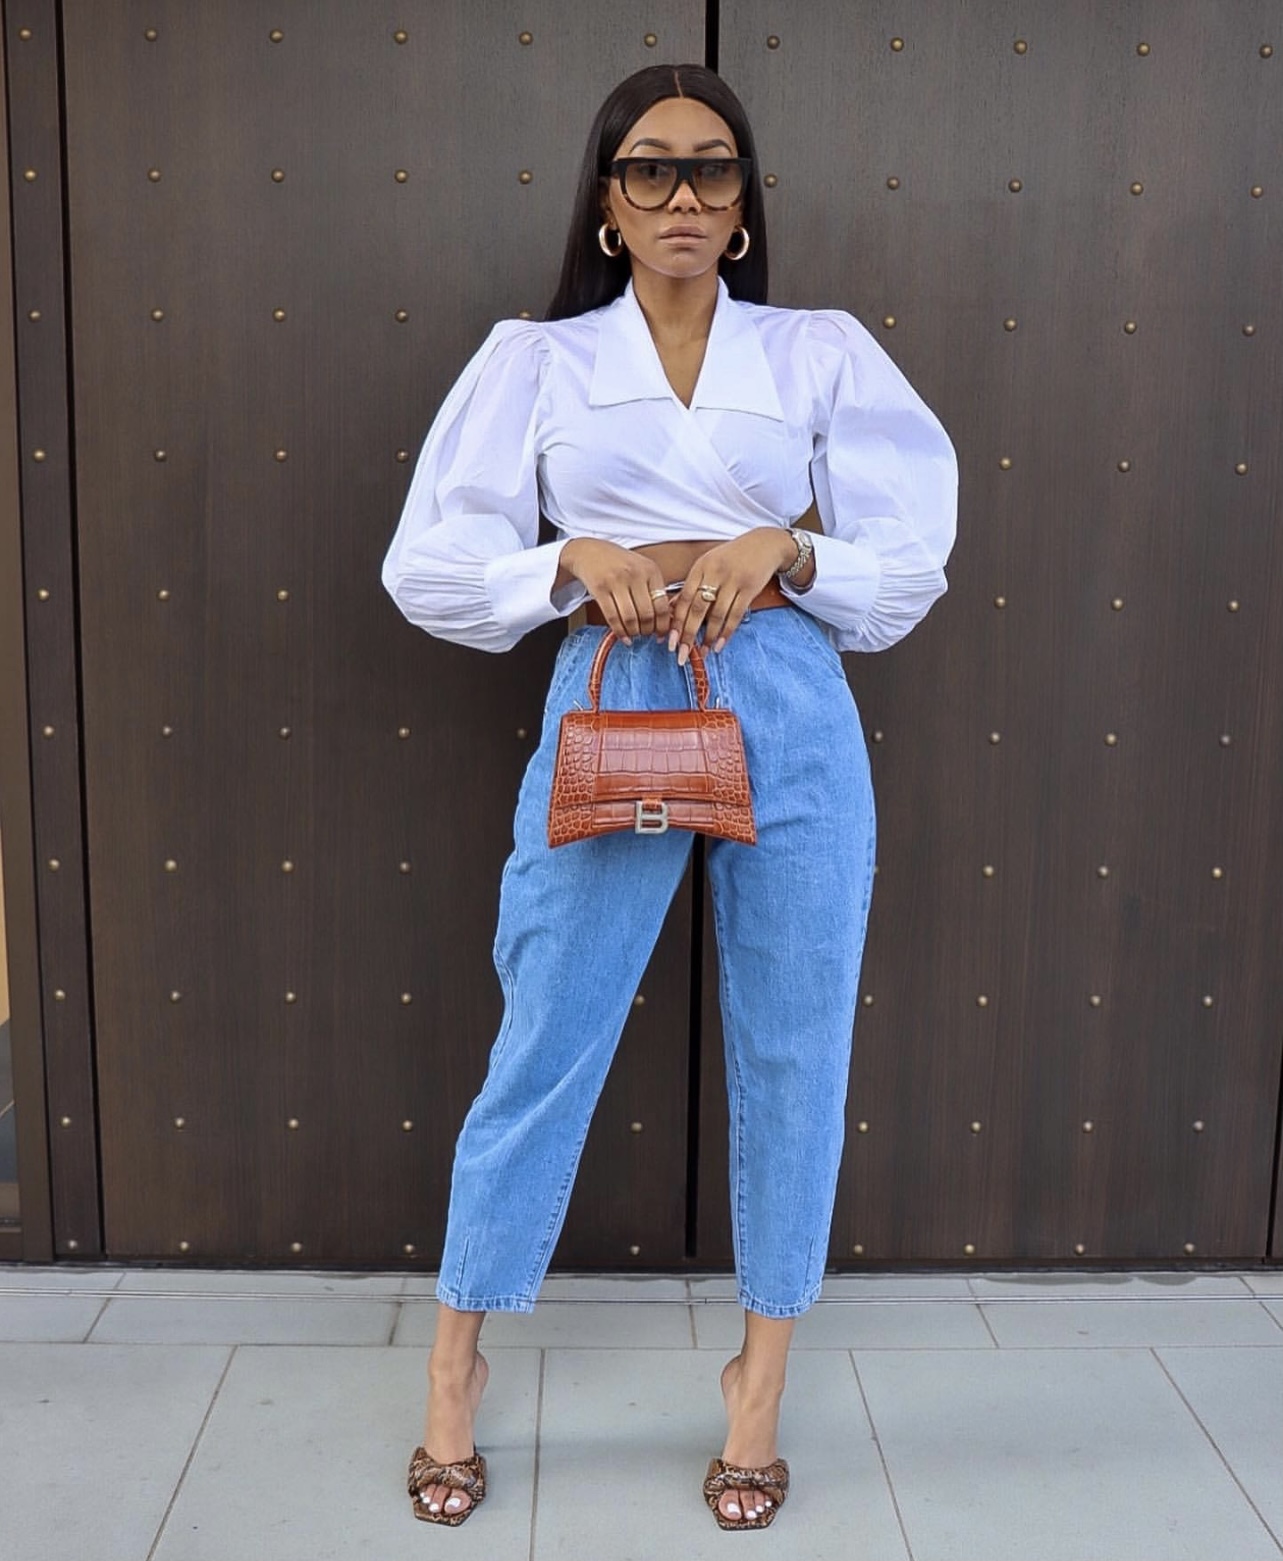 Charlie-kamale-wearing-shop-shops-on-sale-and-cool-fashion-items-2021